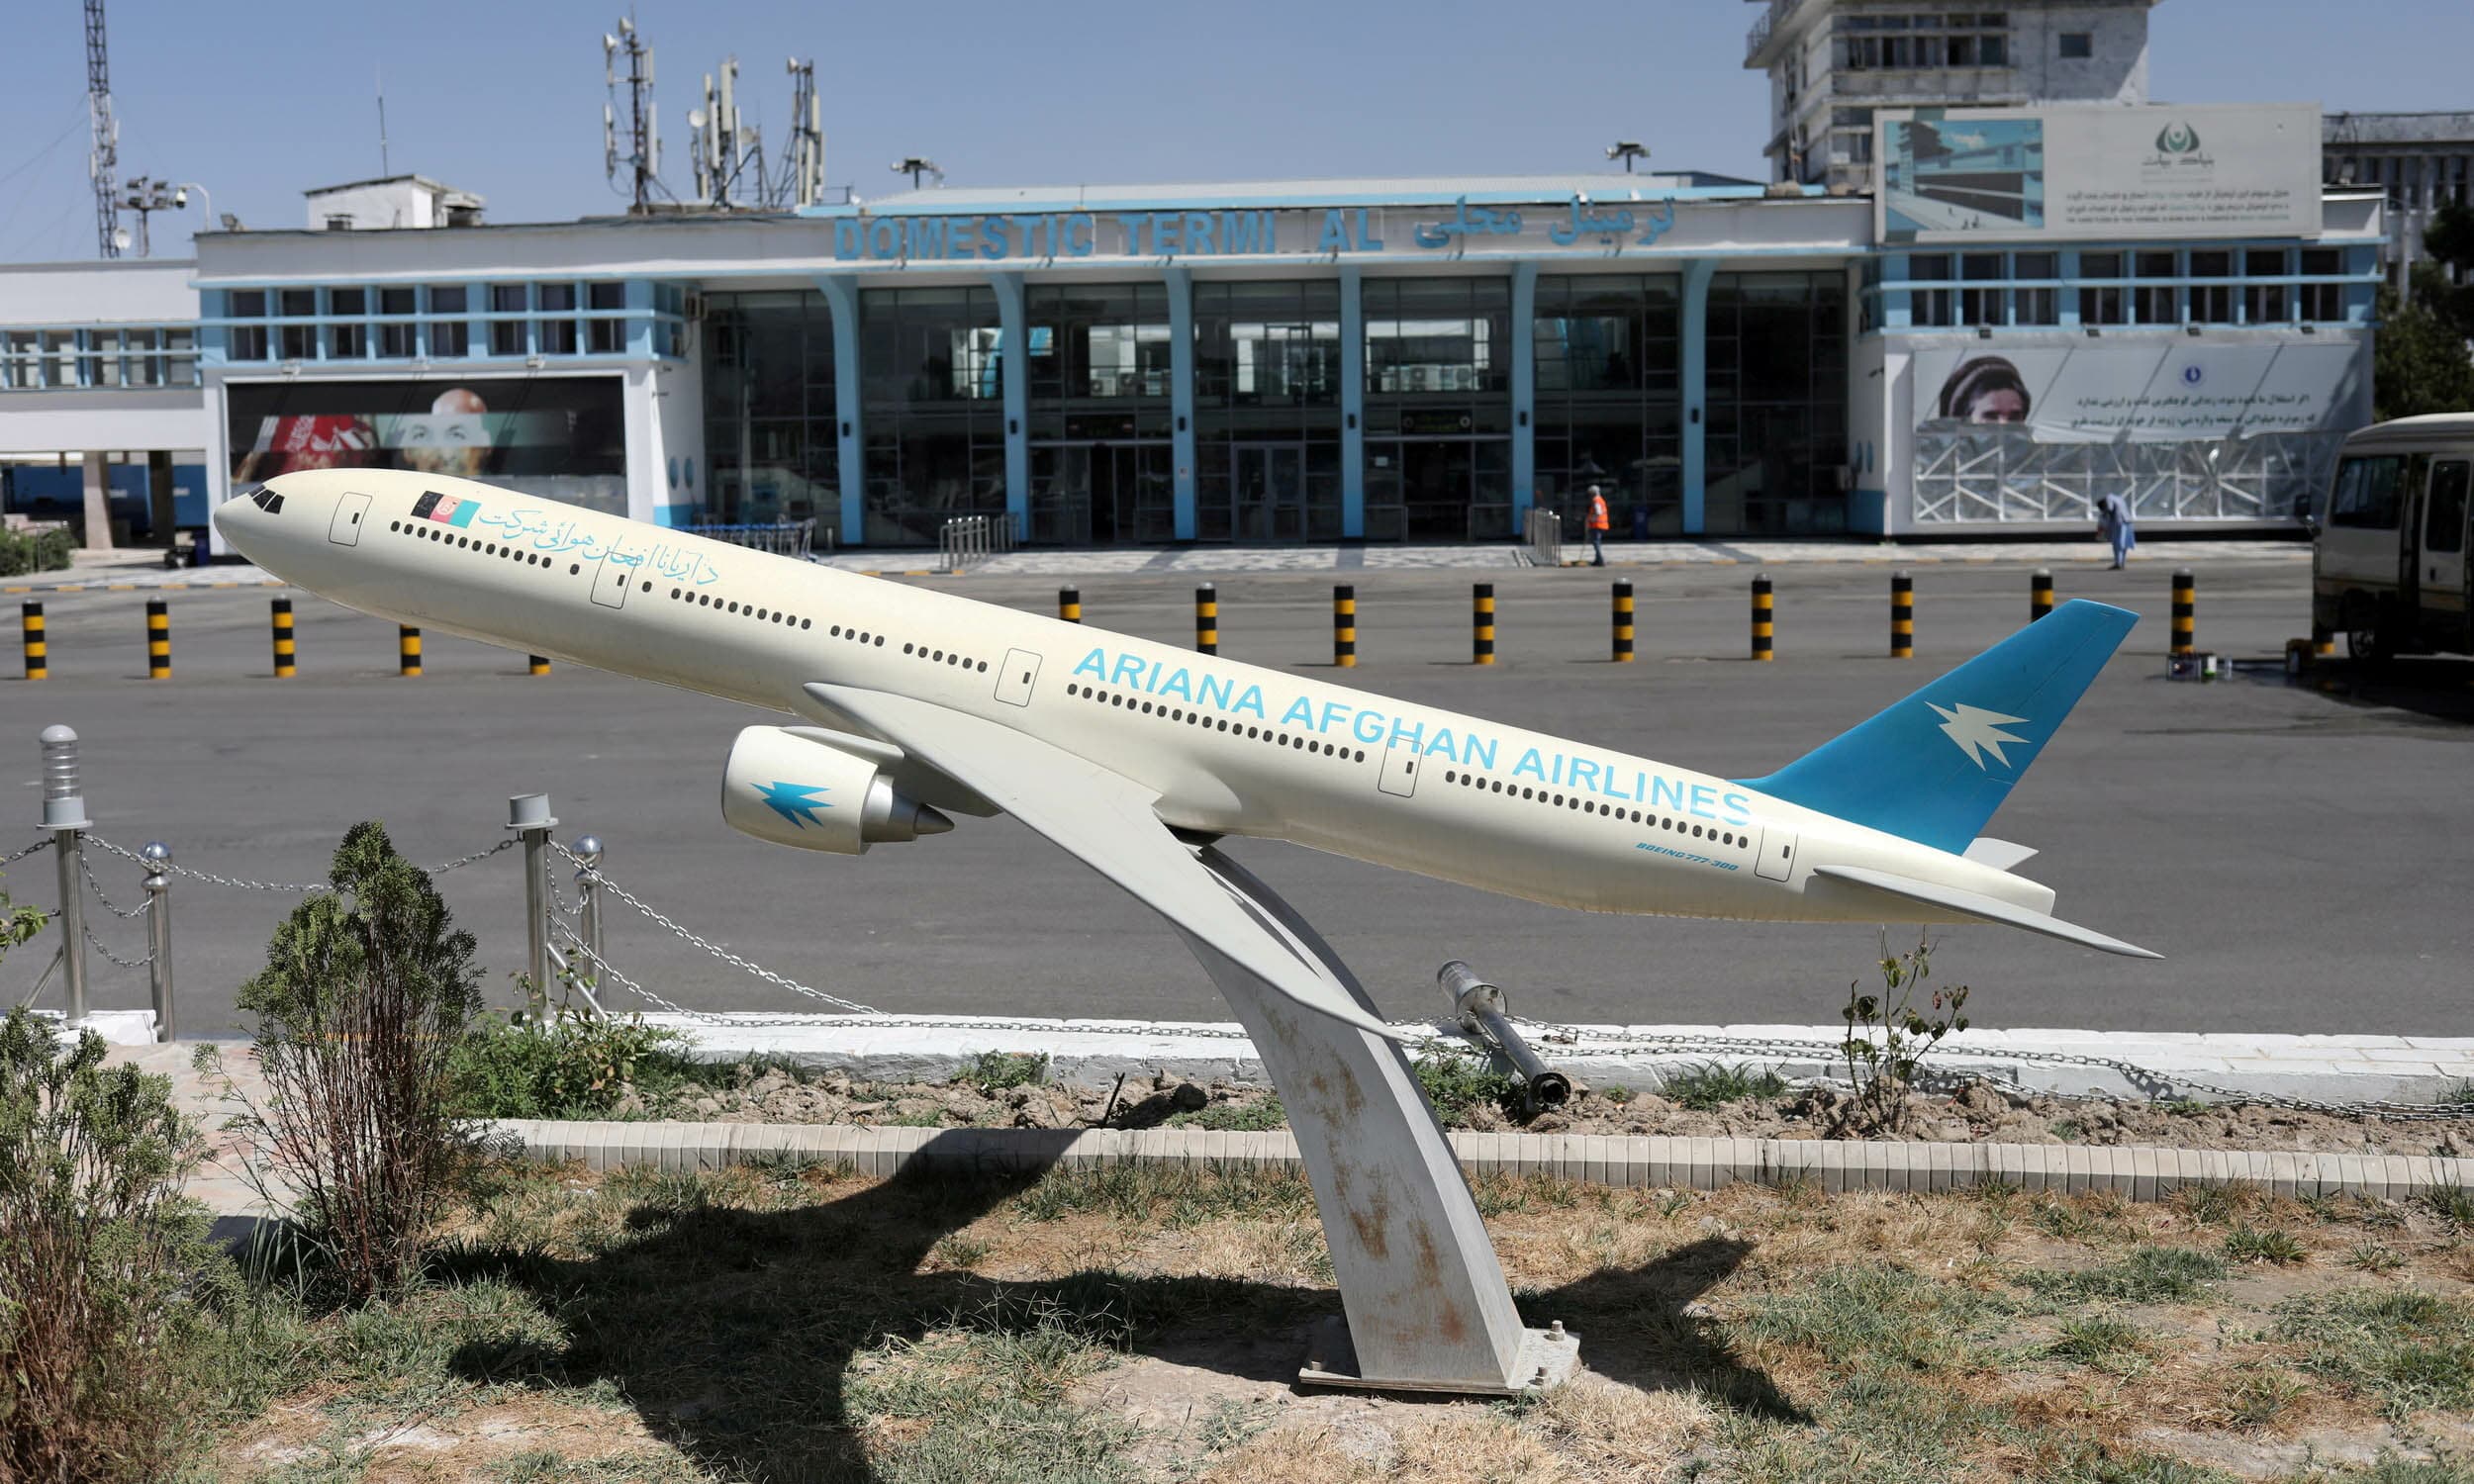 A model of an Ariana Afghan Airlines jet is seen in front of the international airport in Kabul on September 5. — Reuters